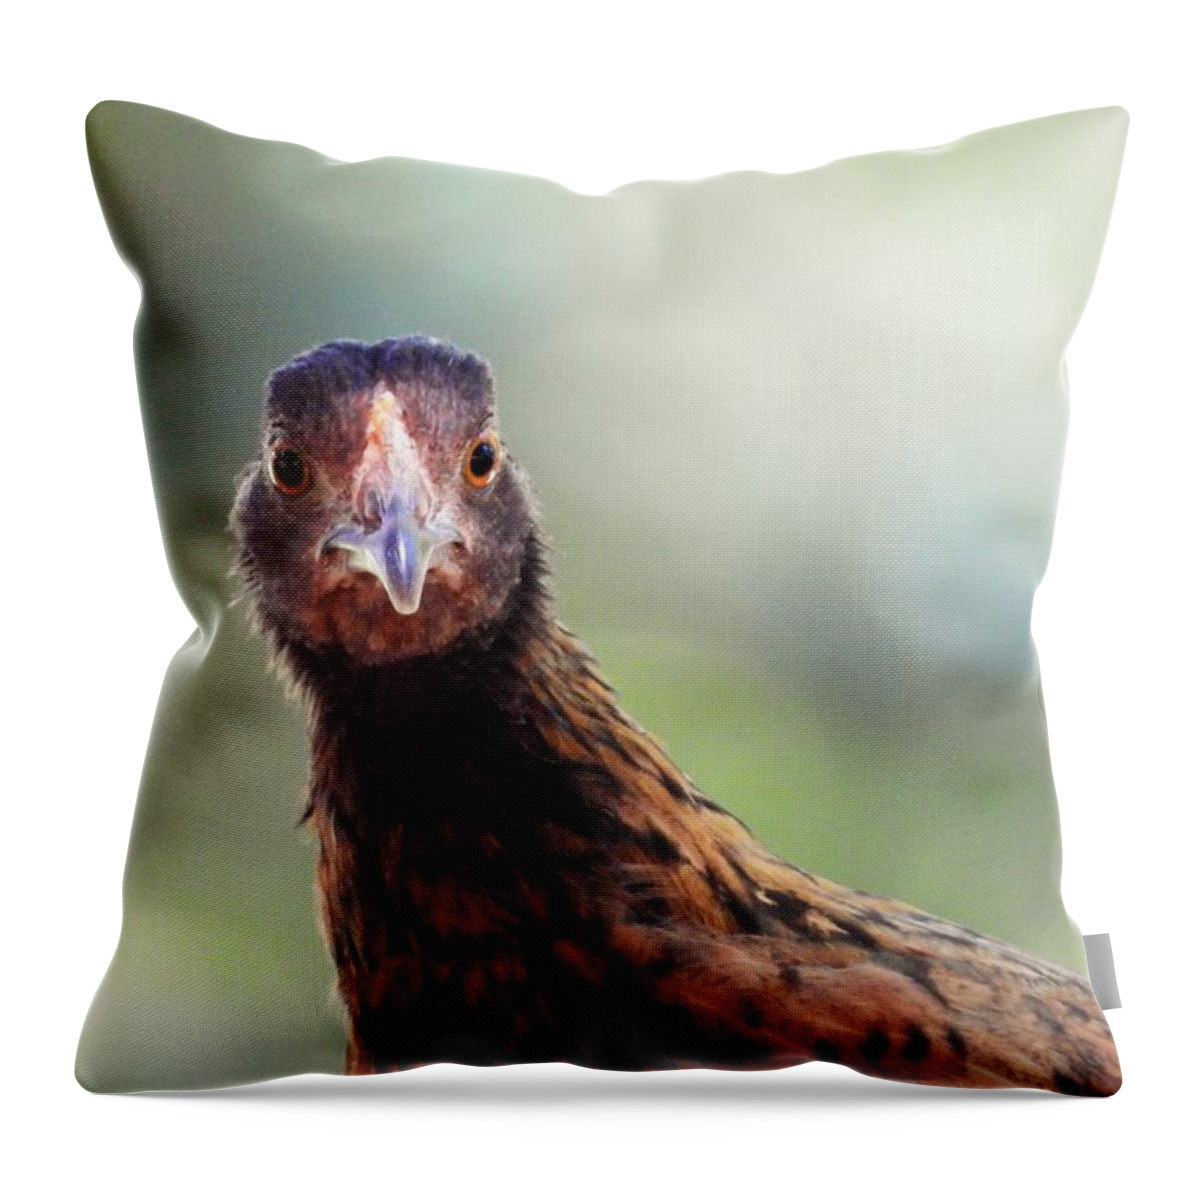 Chickens Hen Pose Nature Wild Wildlife Animal Bird Bird-watching Comical Funny Bird Photography Throw Pillow featuring the photograph Love That Smile by Jan Gelders